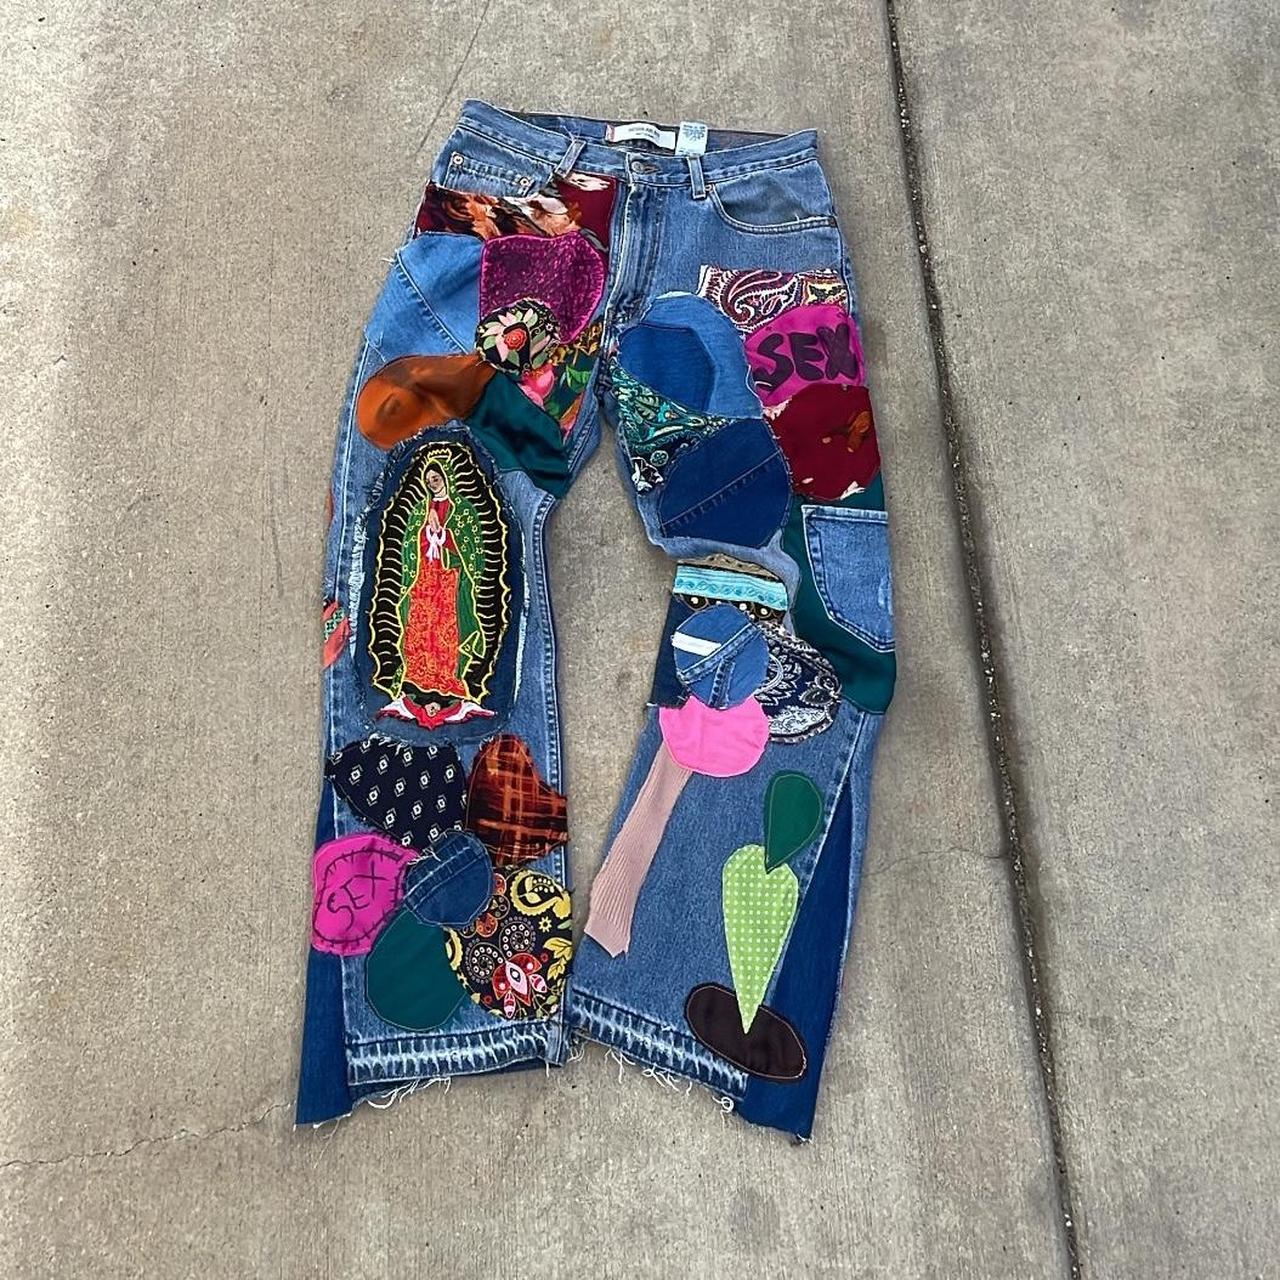 Bundle of 2 RSQ Distressed Mom Jeans Size 31 ⭐️SALE⭐️ - Depop